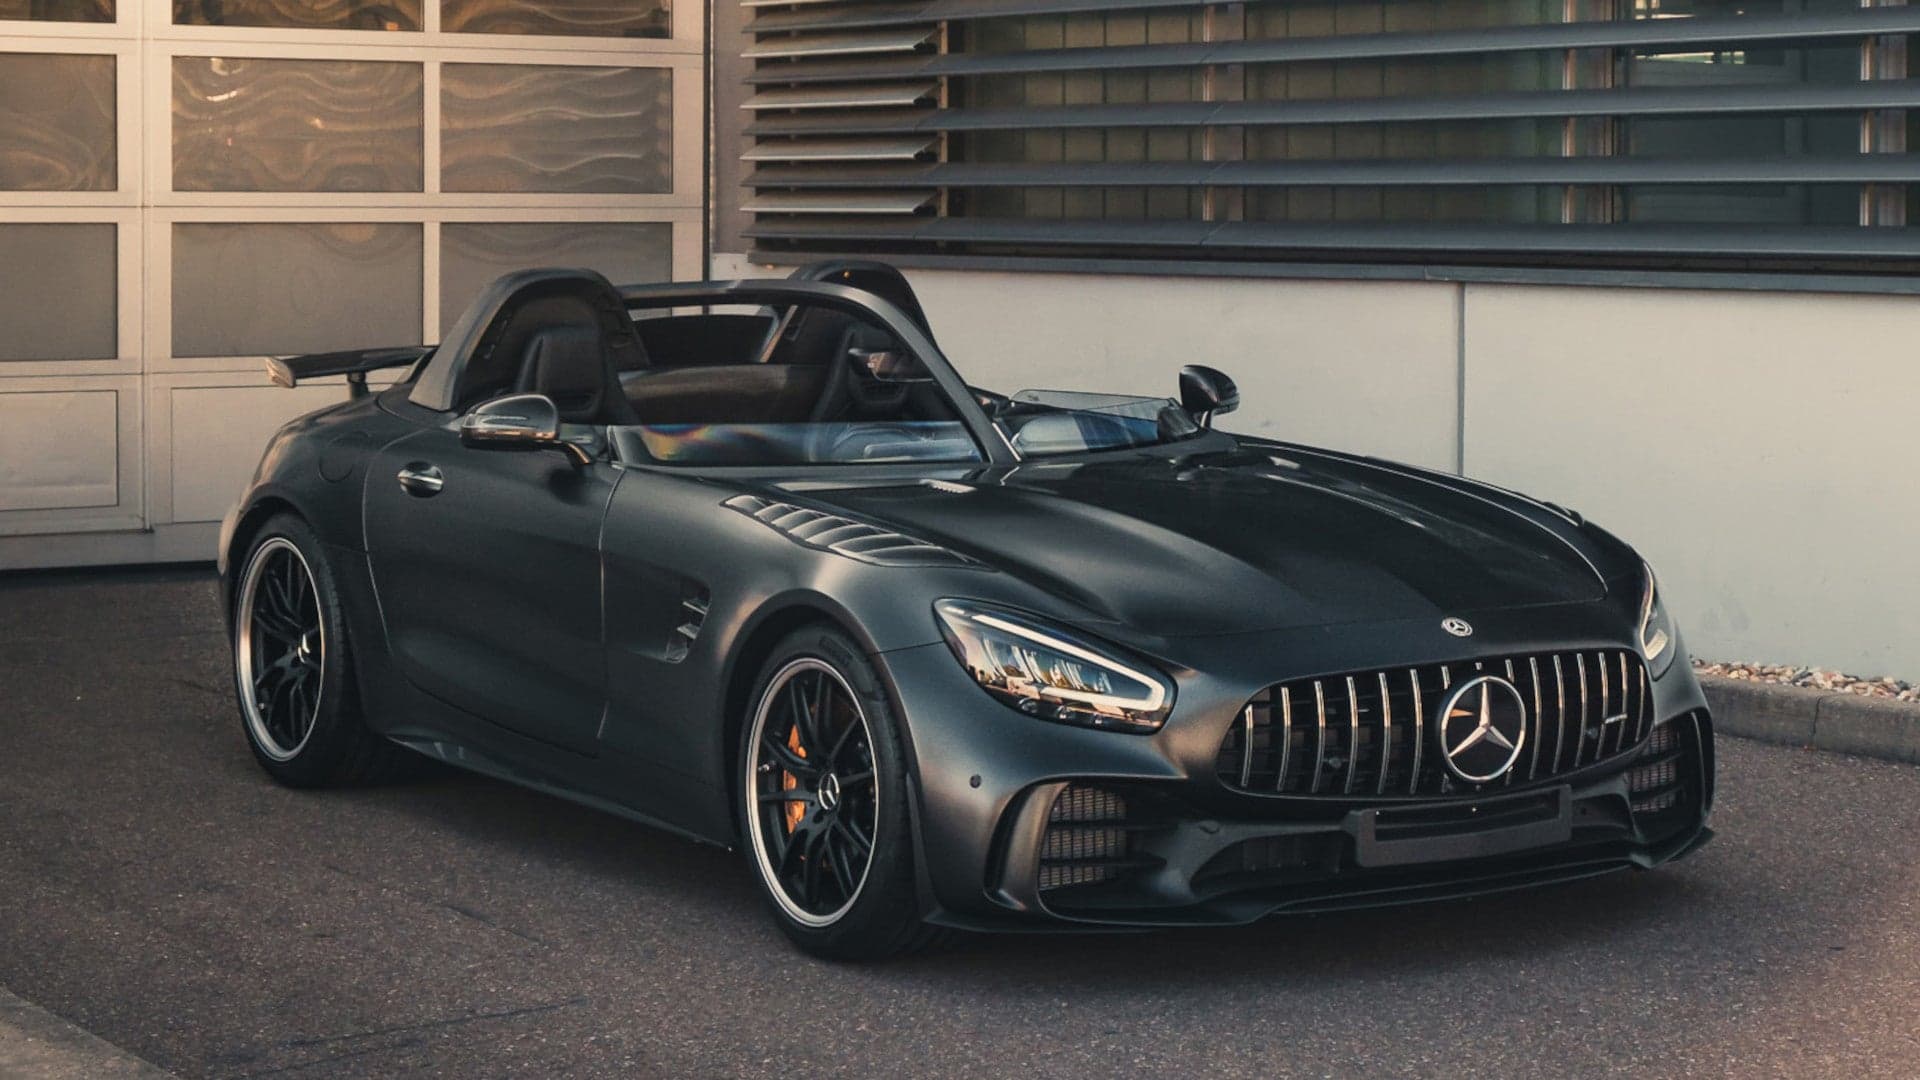 There’s Finally a Mercedes-AMG GT R Speedster Build, and It Looks Mean as Hell